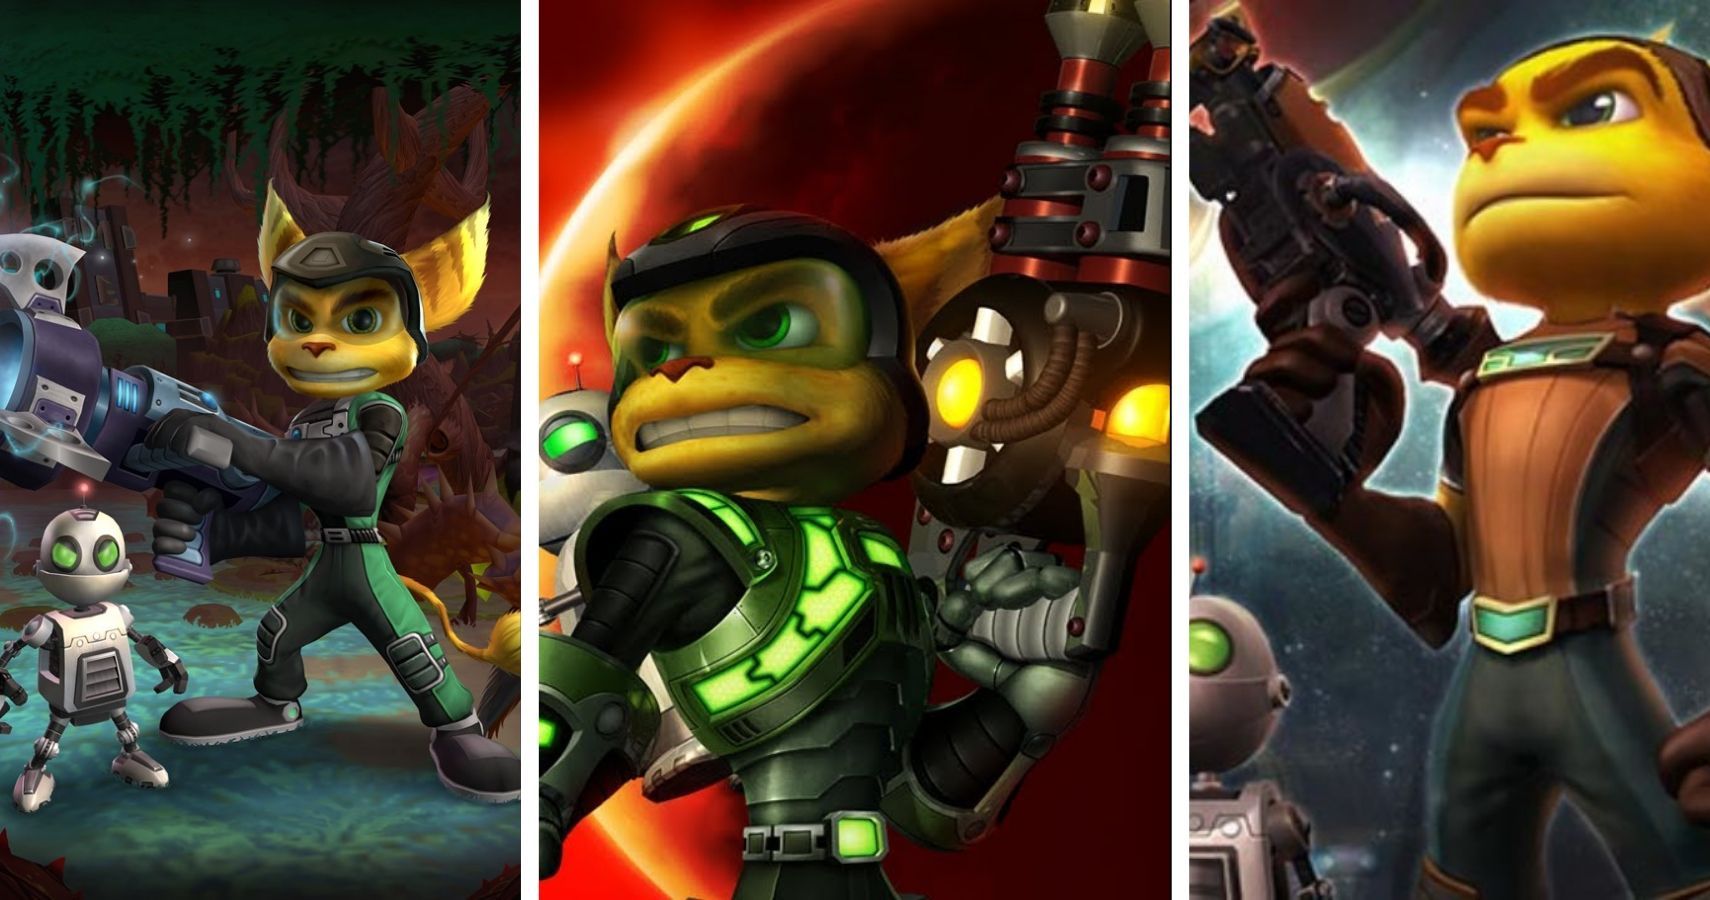 Ratchet & Clank Collection - Metacritic